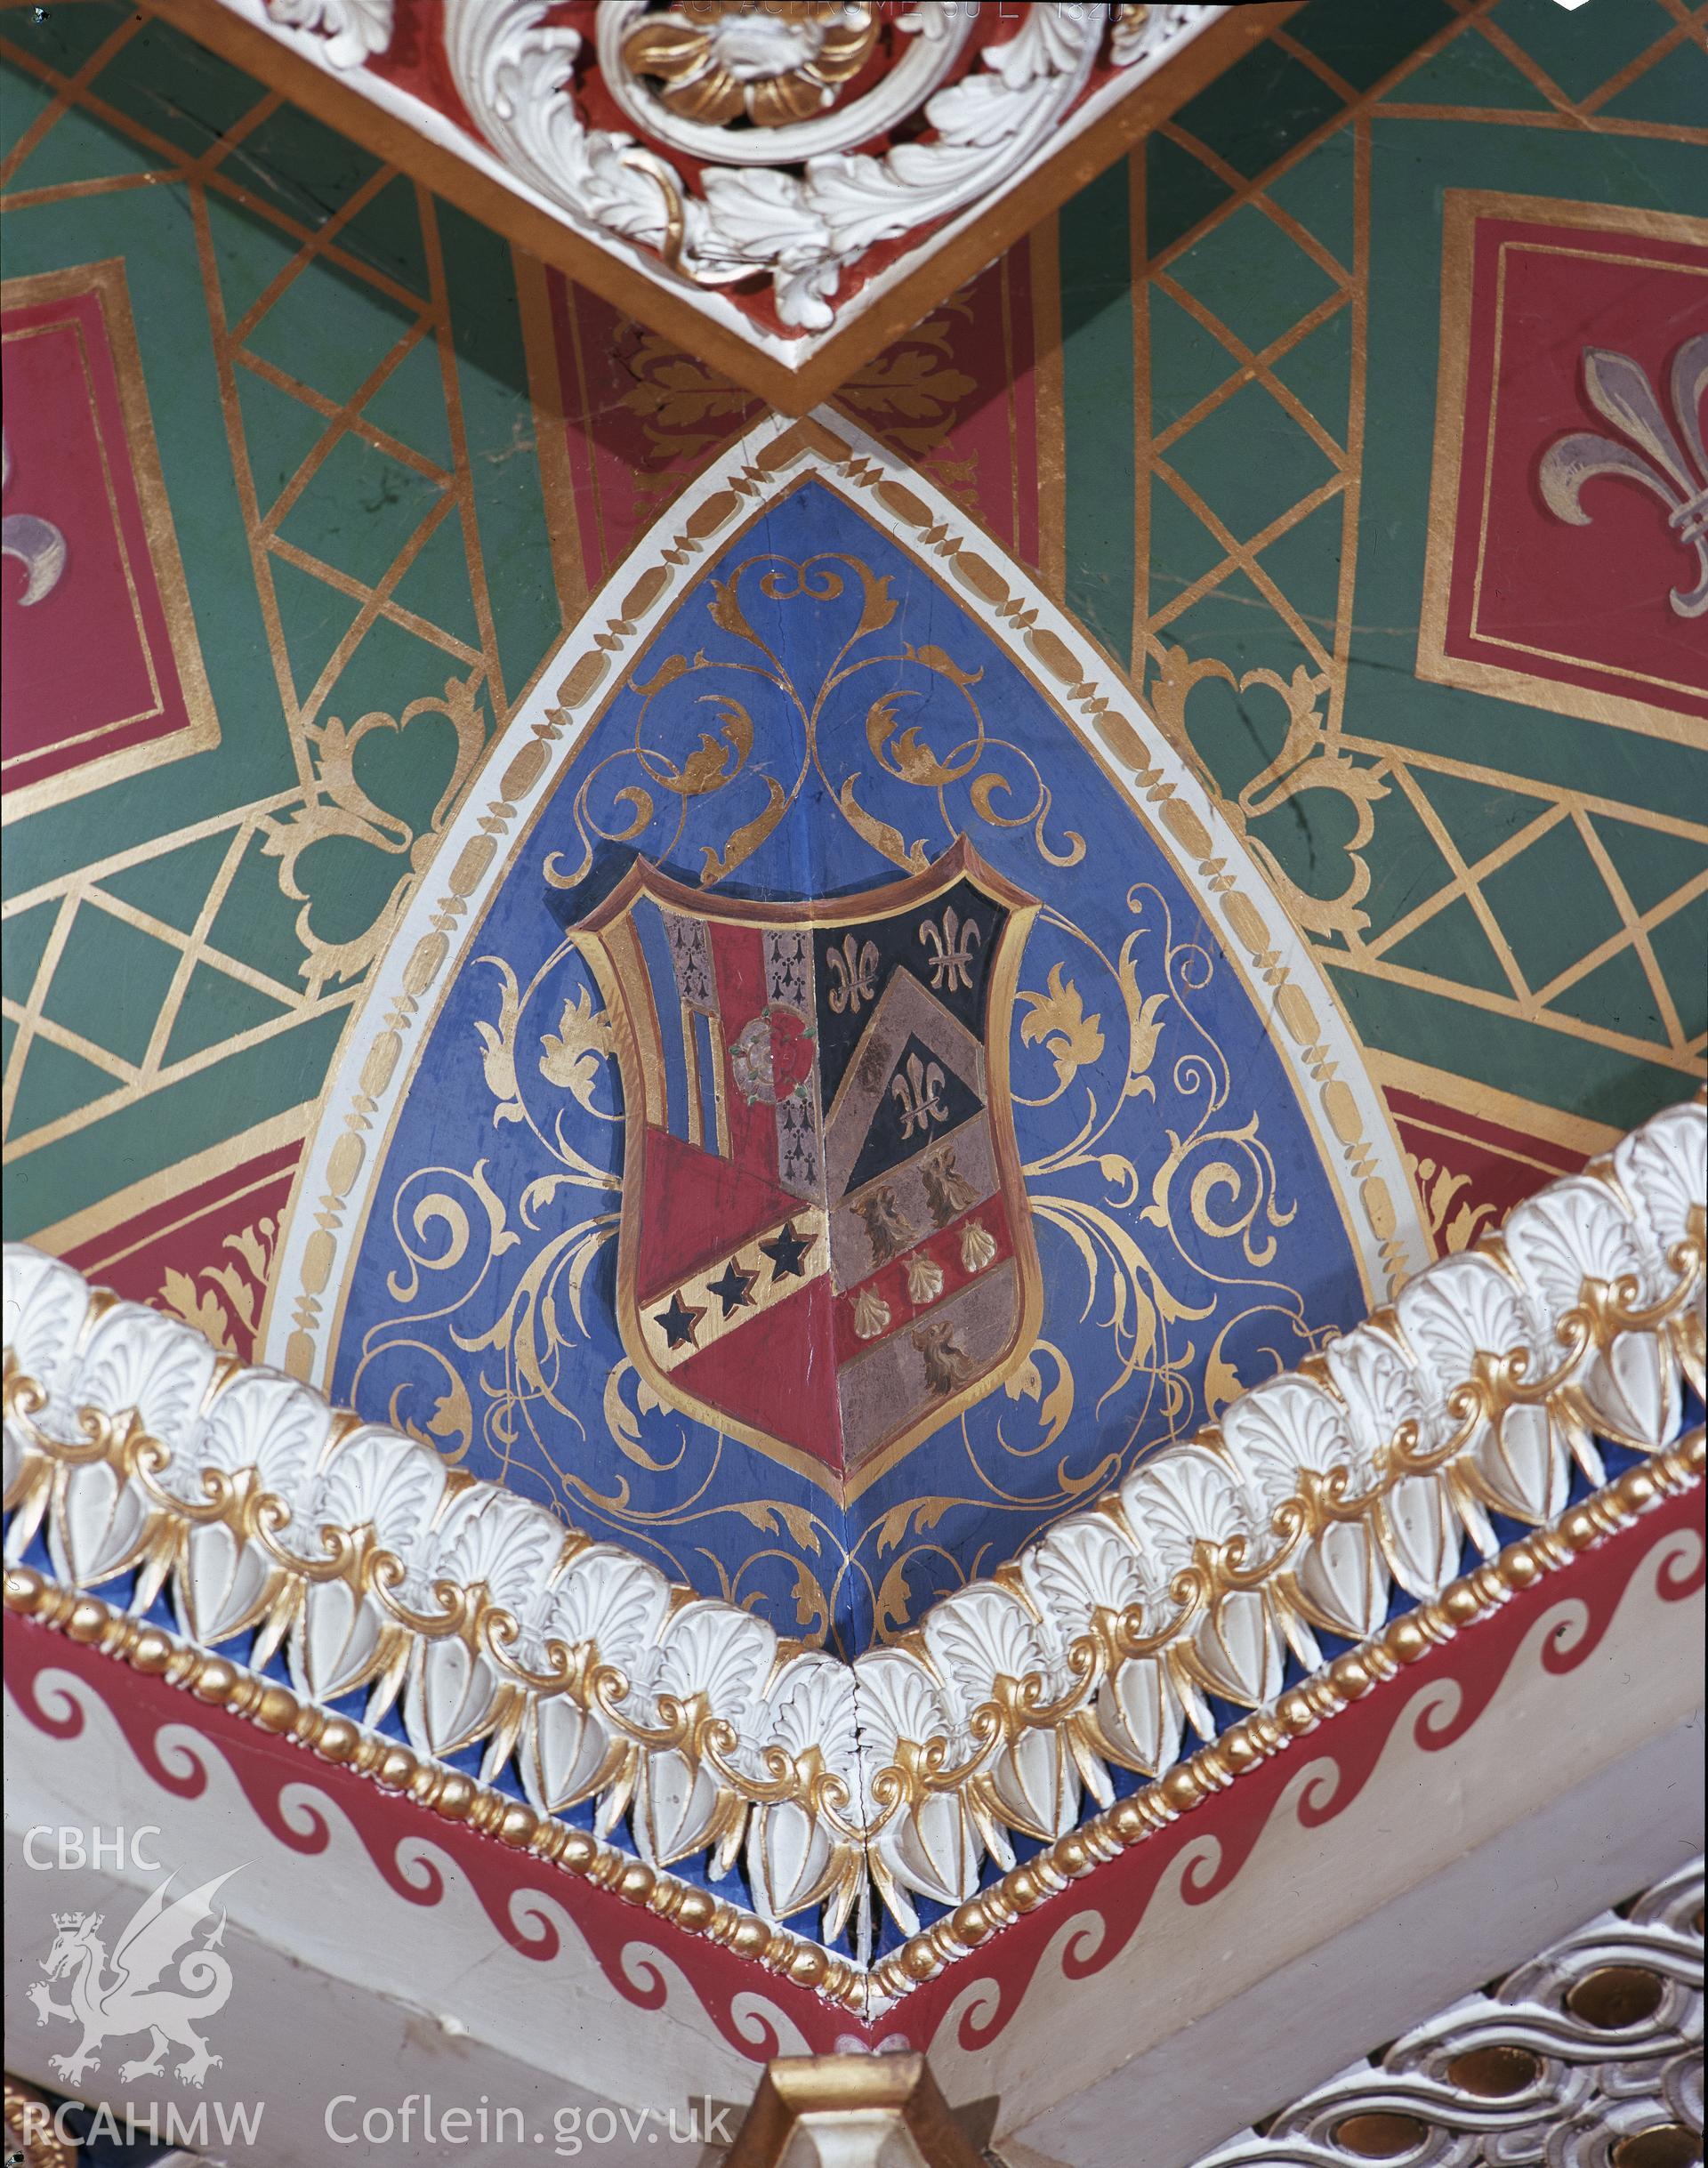 Colour image showing the ceiling in the library at Trawscoed.